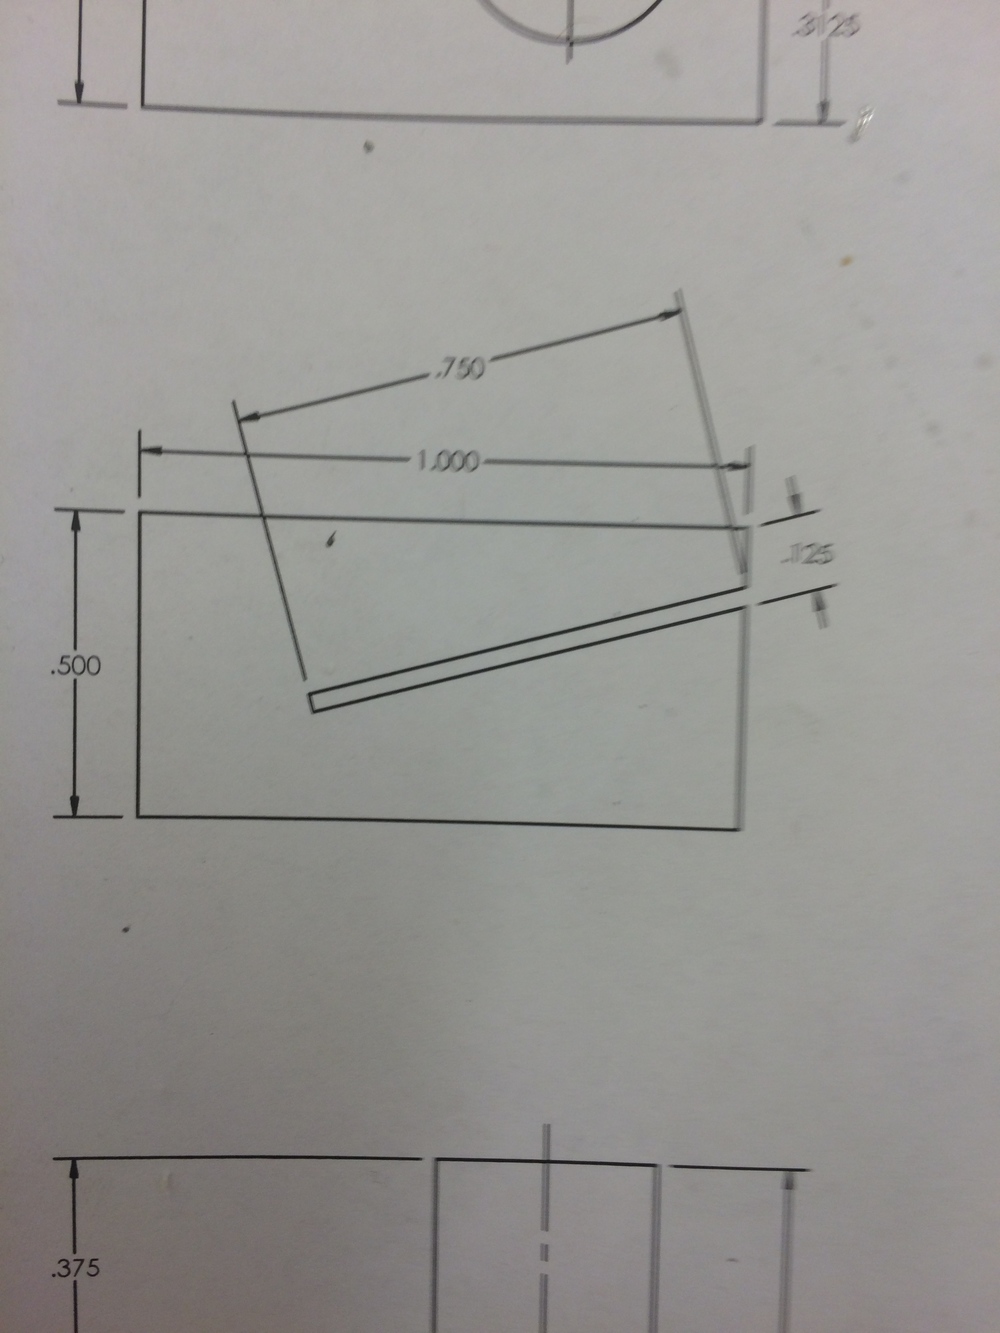  I dimensioned the part based on how it would be fixed to make setting the height and depth easier 